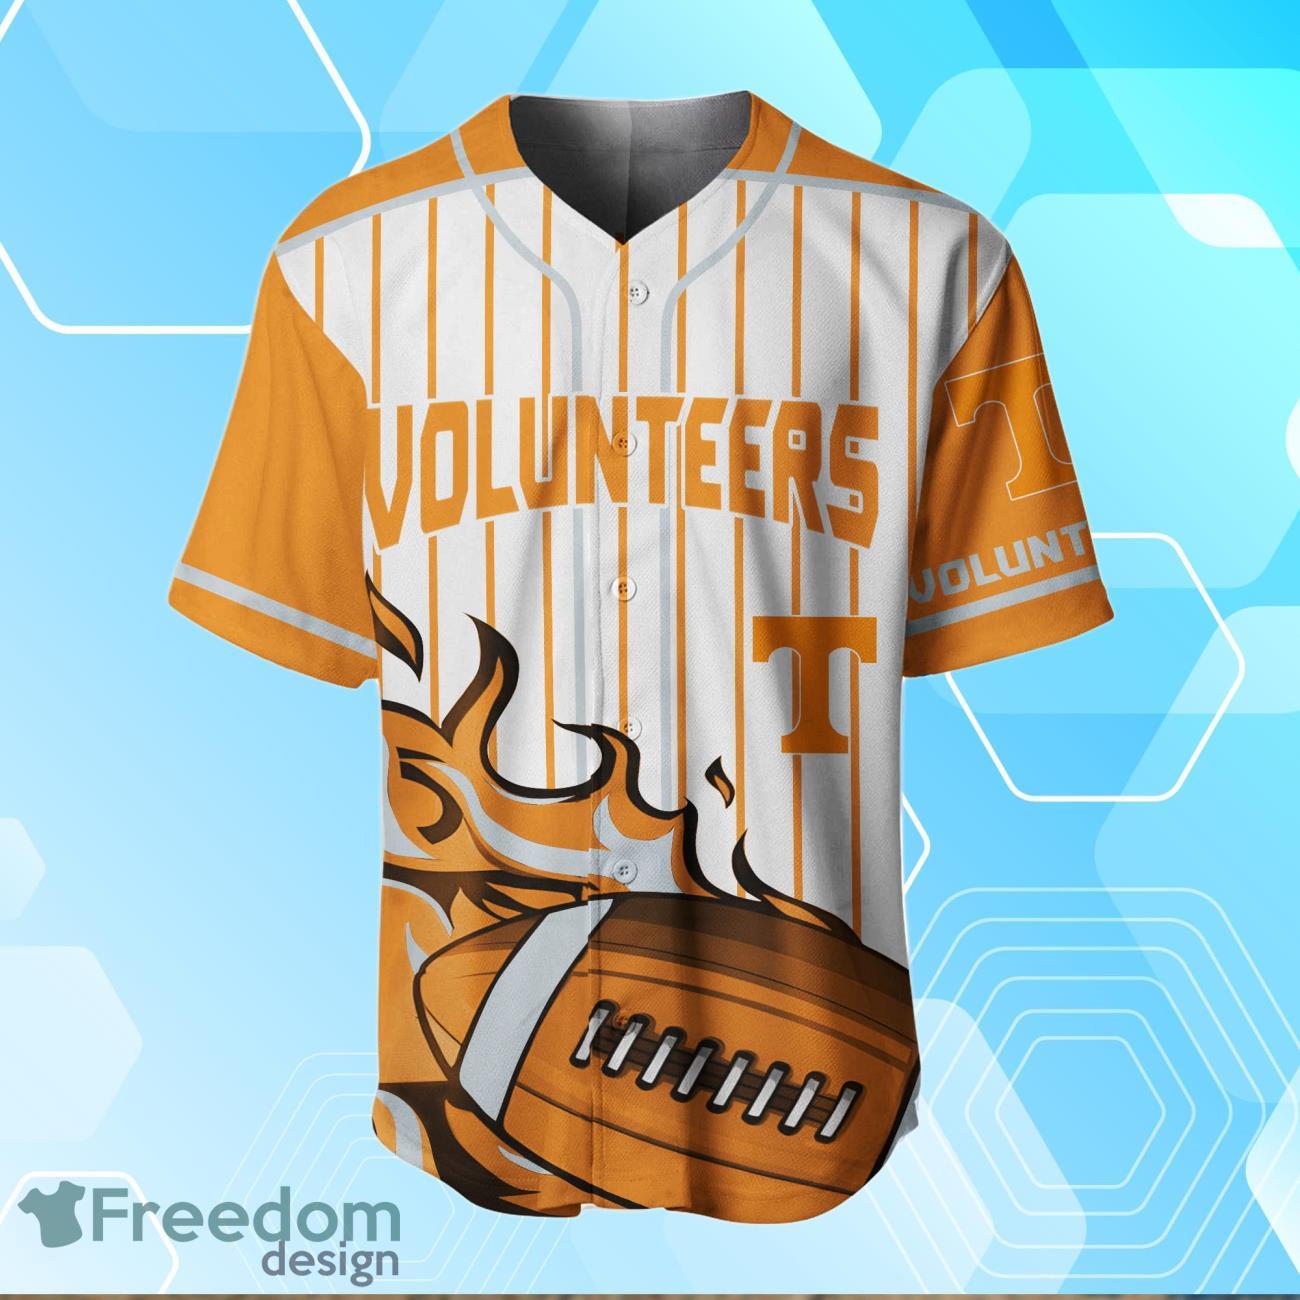 Custom NCAA Baseball Jersey Tennessee Volunteers Name and Number College Grey